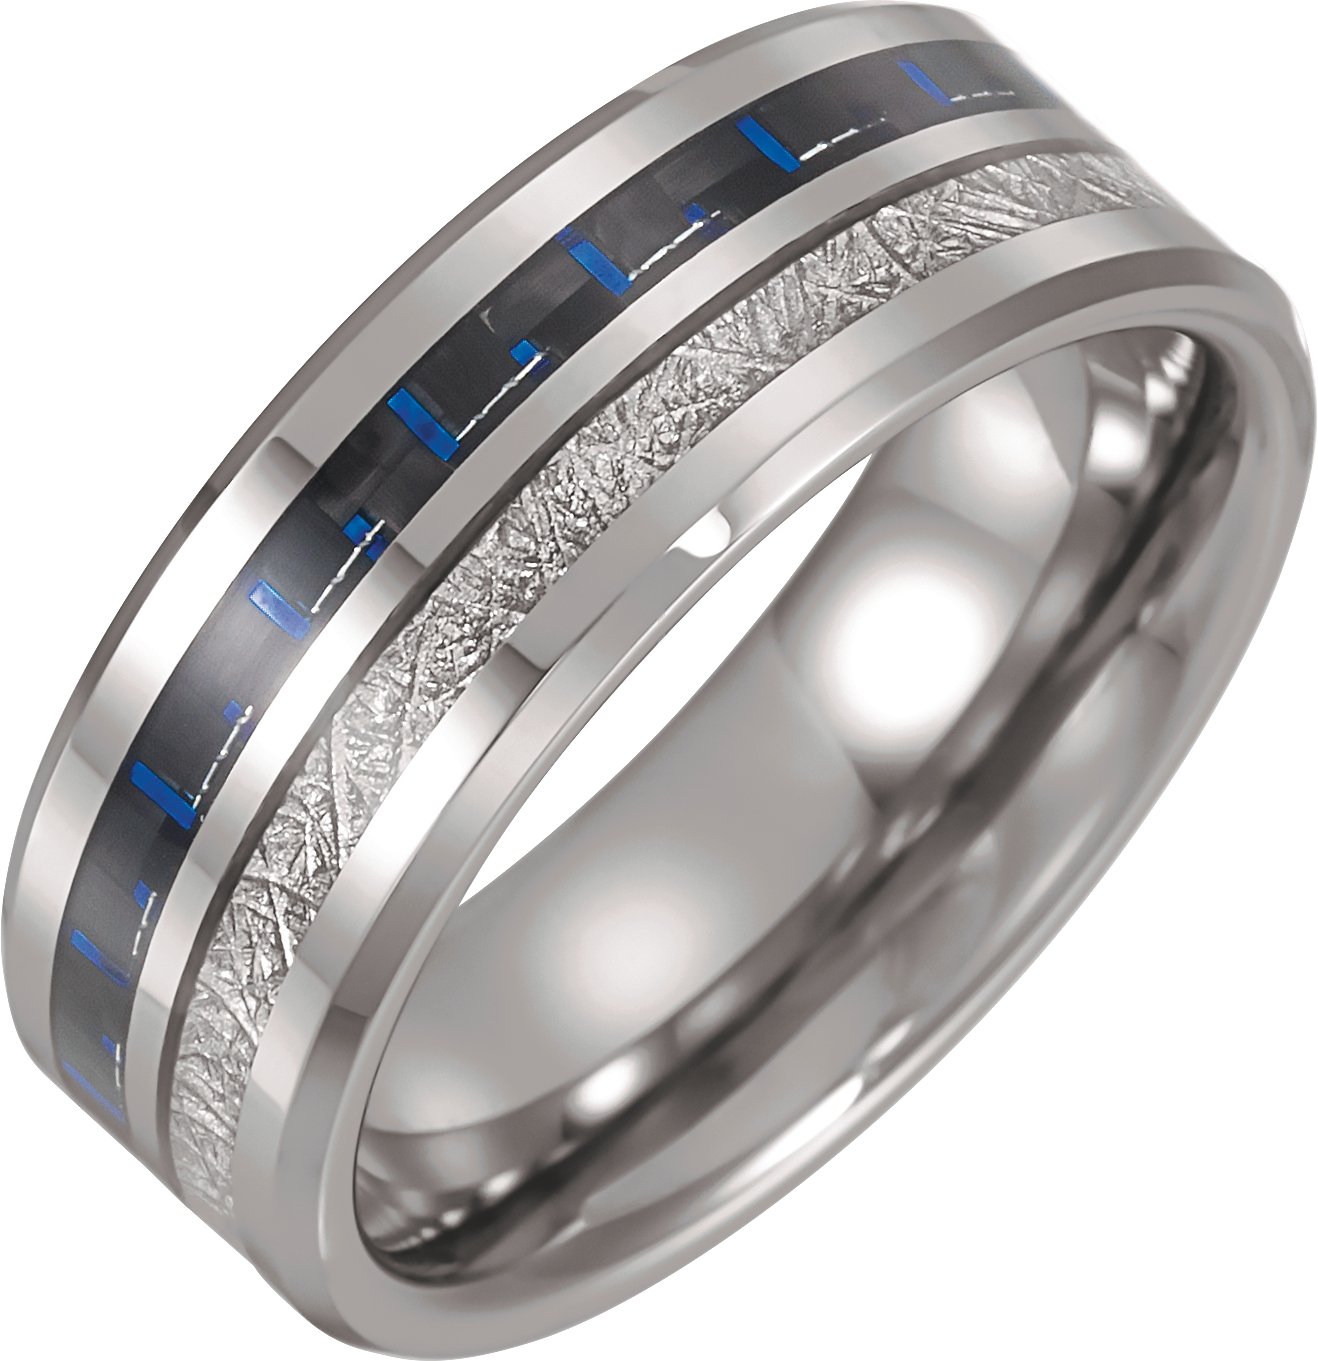 Tungsten 8 mm Band with Imitation Meteorite and Carbon Fiber Inlay Size 8.5 